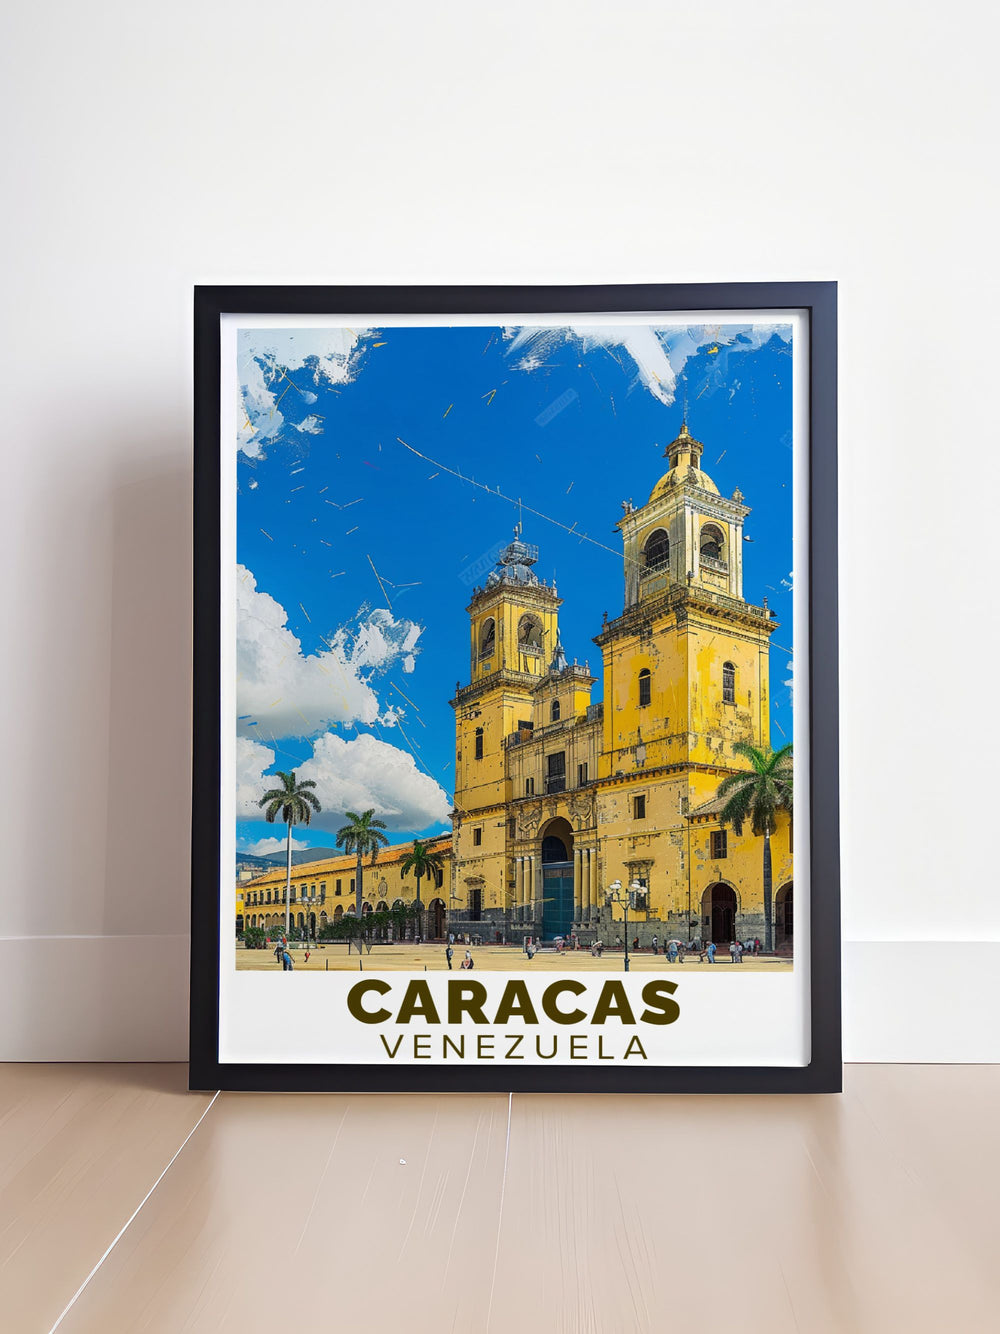 Showcasing the impressive structures of Plaza Bolivar and the energetic atmosphere of Caracas, this travel poster adds a unique touch of historical and urban elegance to your living space.